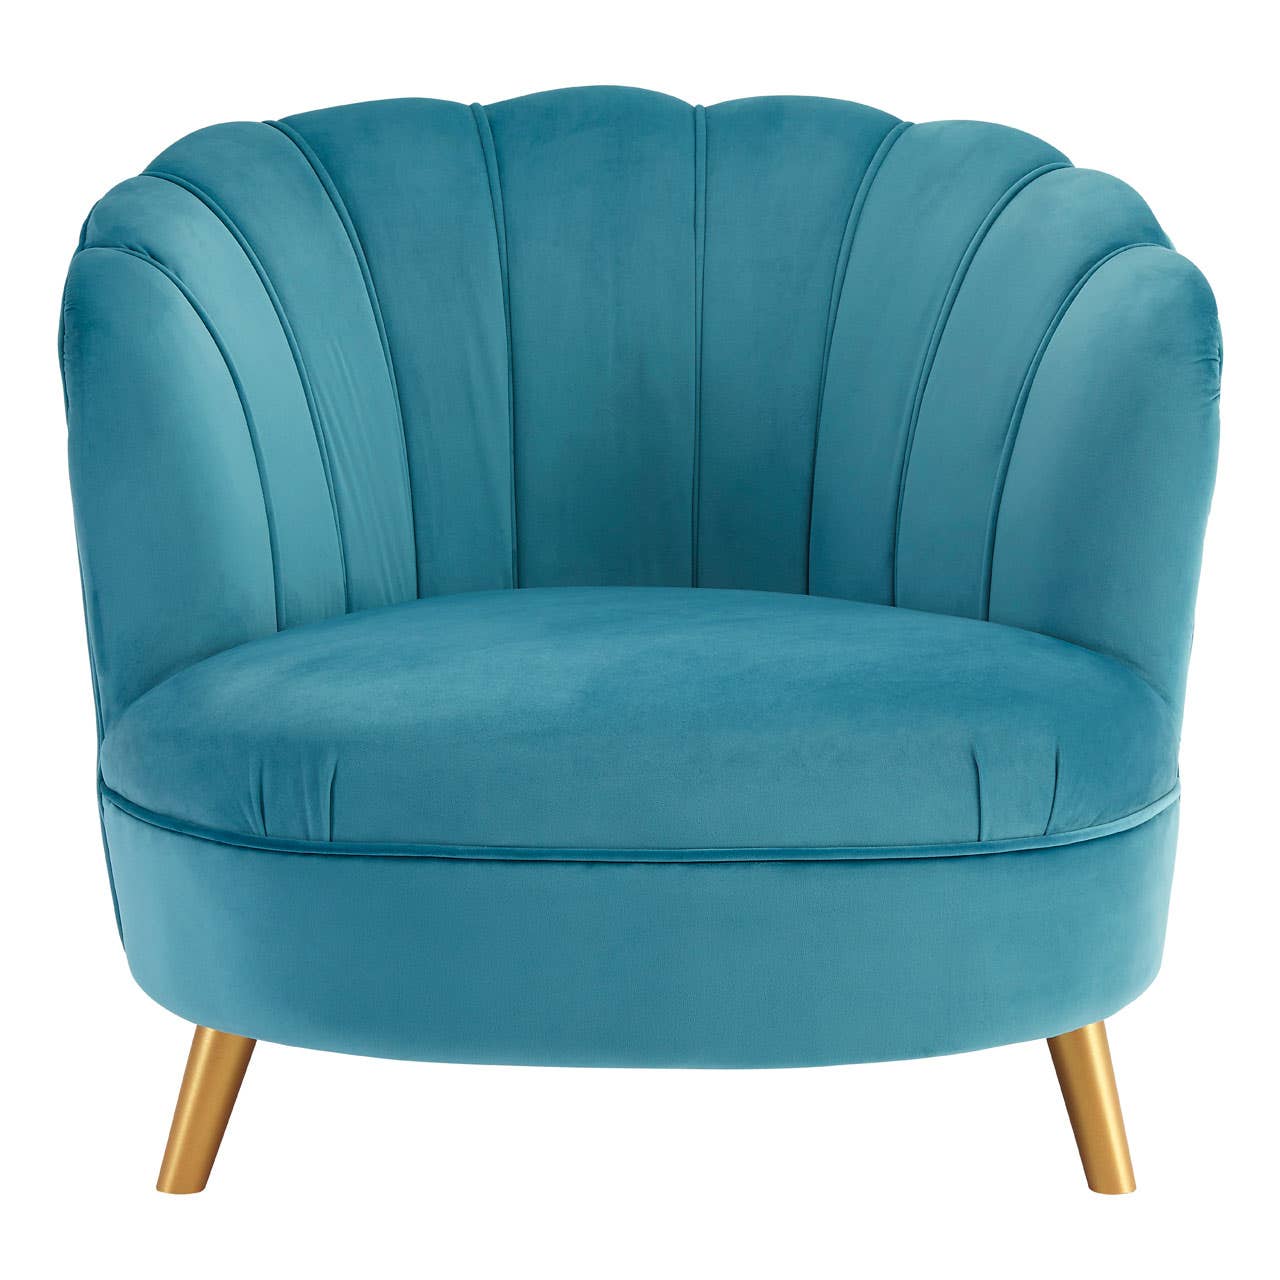 Orlina Blue Velvet Chair With Gold Wood Legs